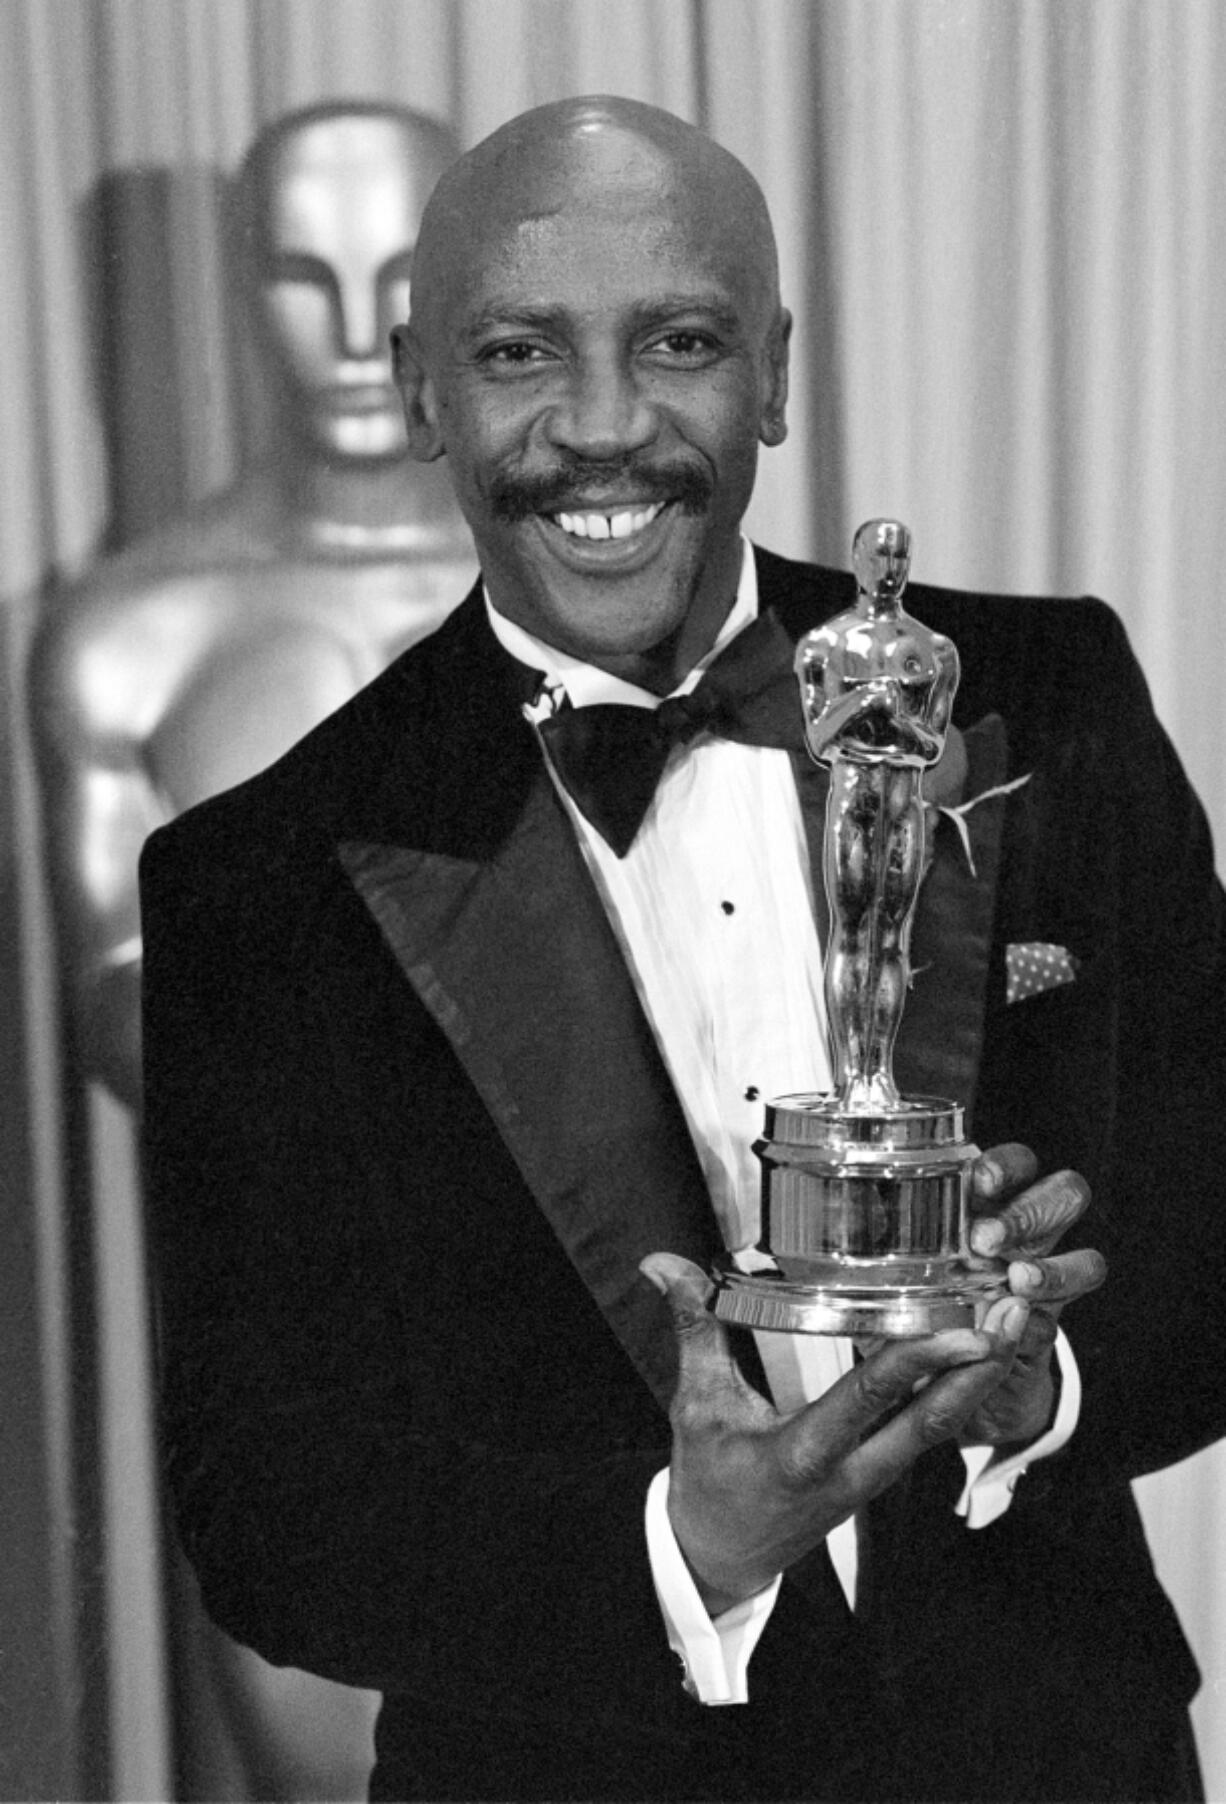 FILE - Louis Gossett Jr., poses with the Oscar for best supporting actor for his role in &ldquo;An Officer and a Gentleman,&rdquo; at the annual Academy Awards presentation in Los Angeles on April 11, 1983. Gossett Jr., the first Black man to win a supporting actor Oscar and an Emmy winner for his role in the seminal TV miniseries &ldquo;Roots,&rdquo; has died. He was 87.